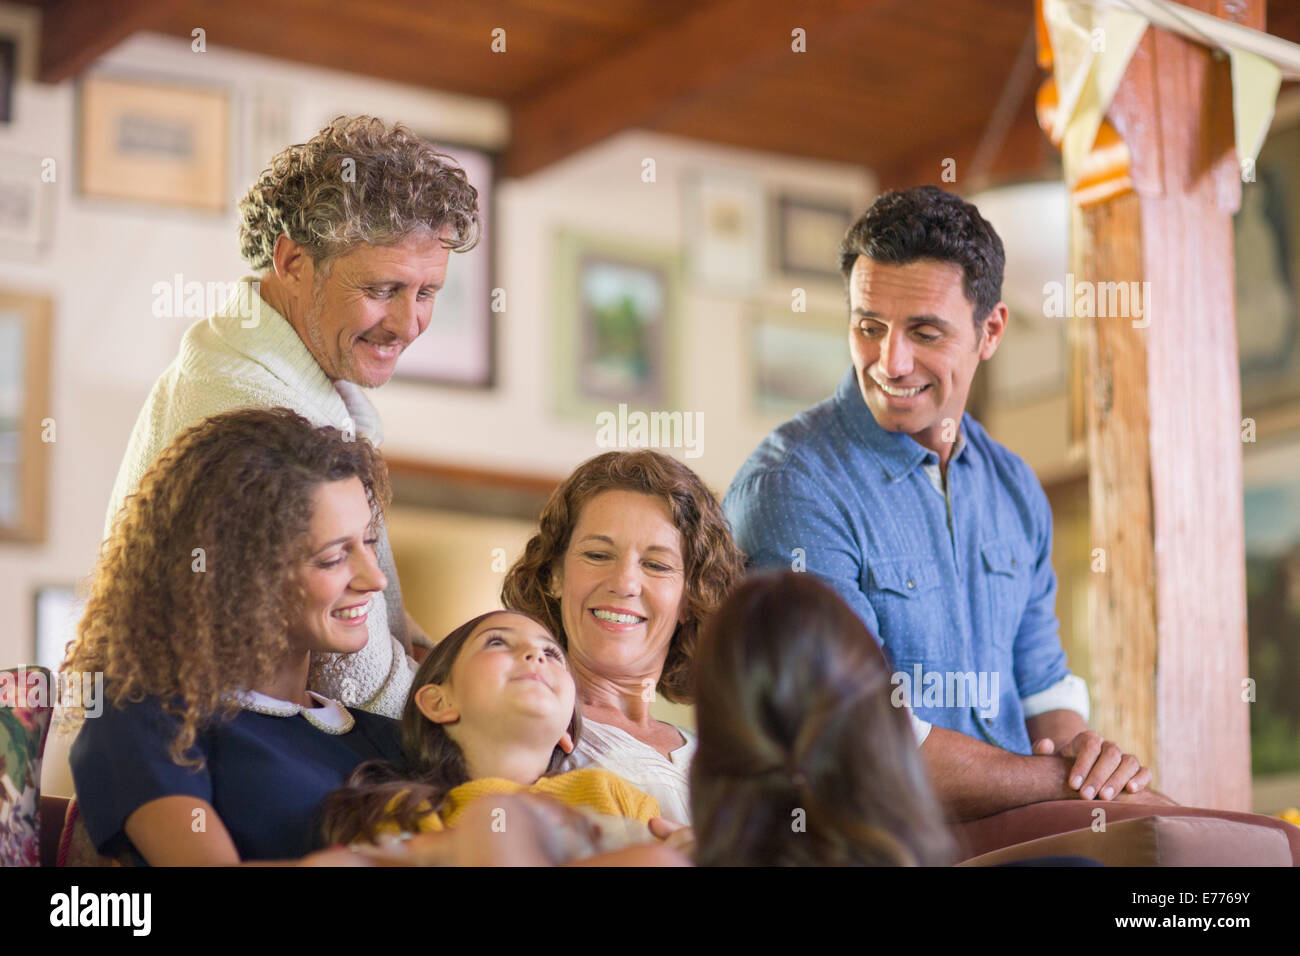 Family gathered on the couch together Stock Photo